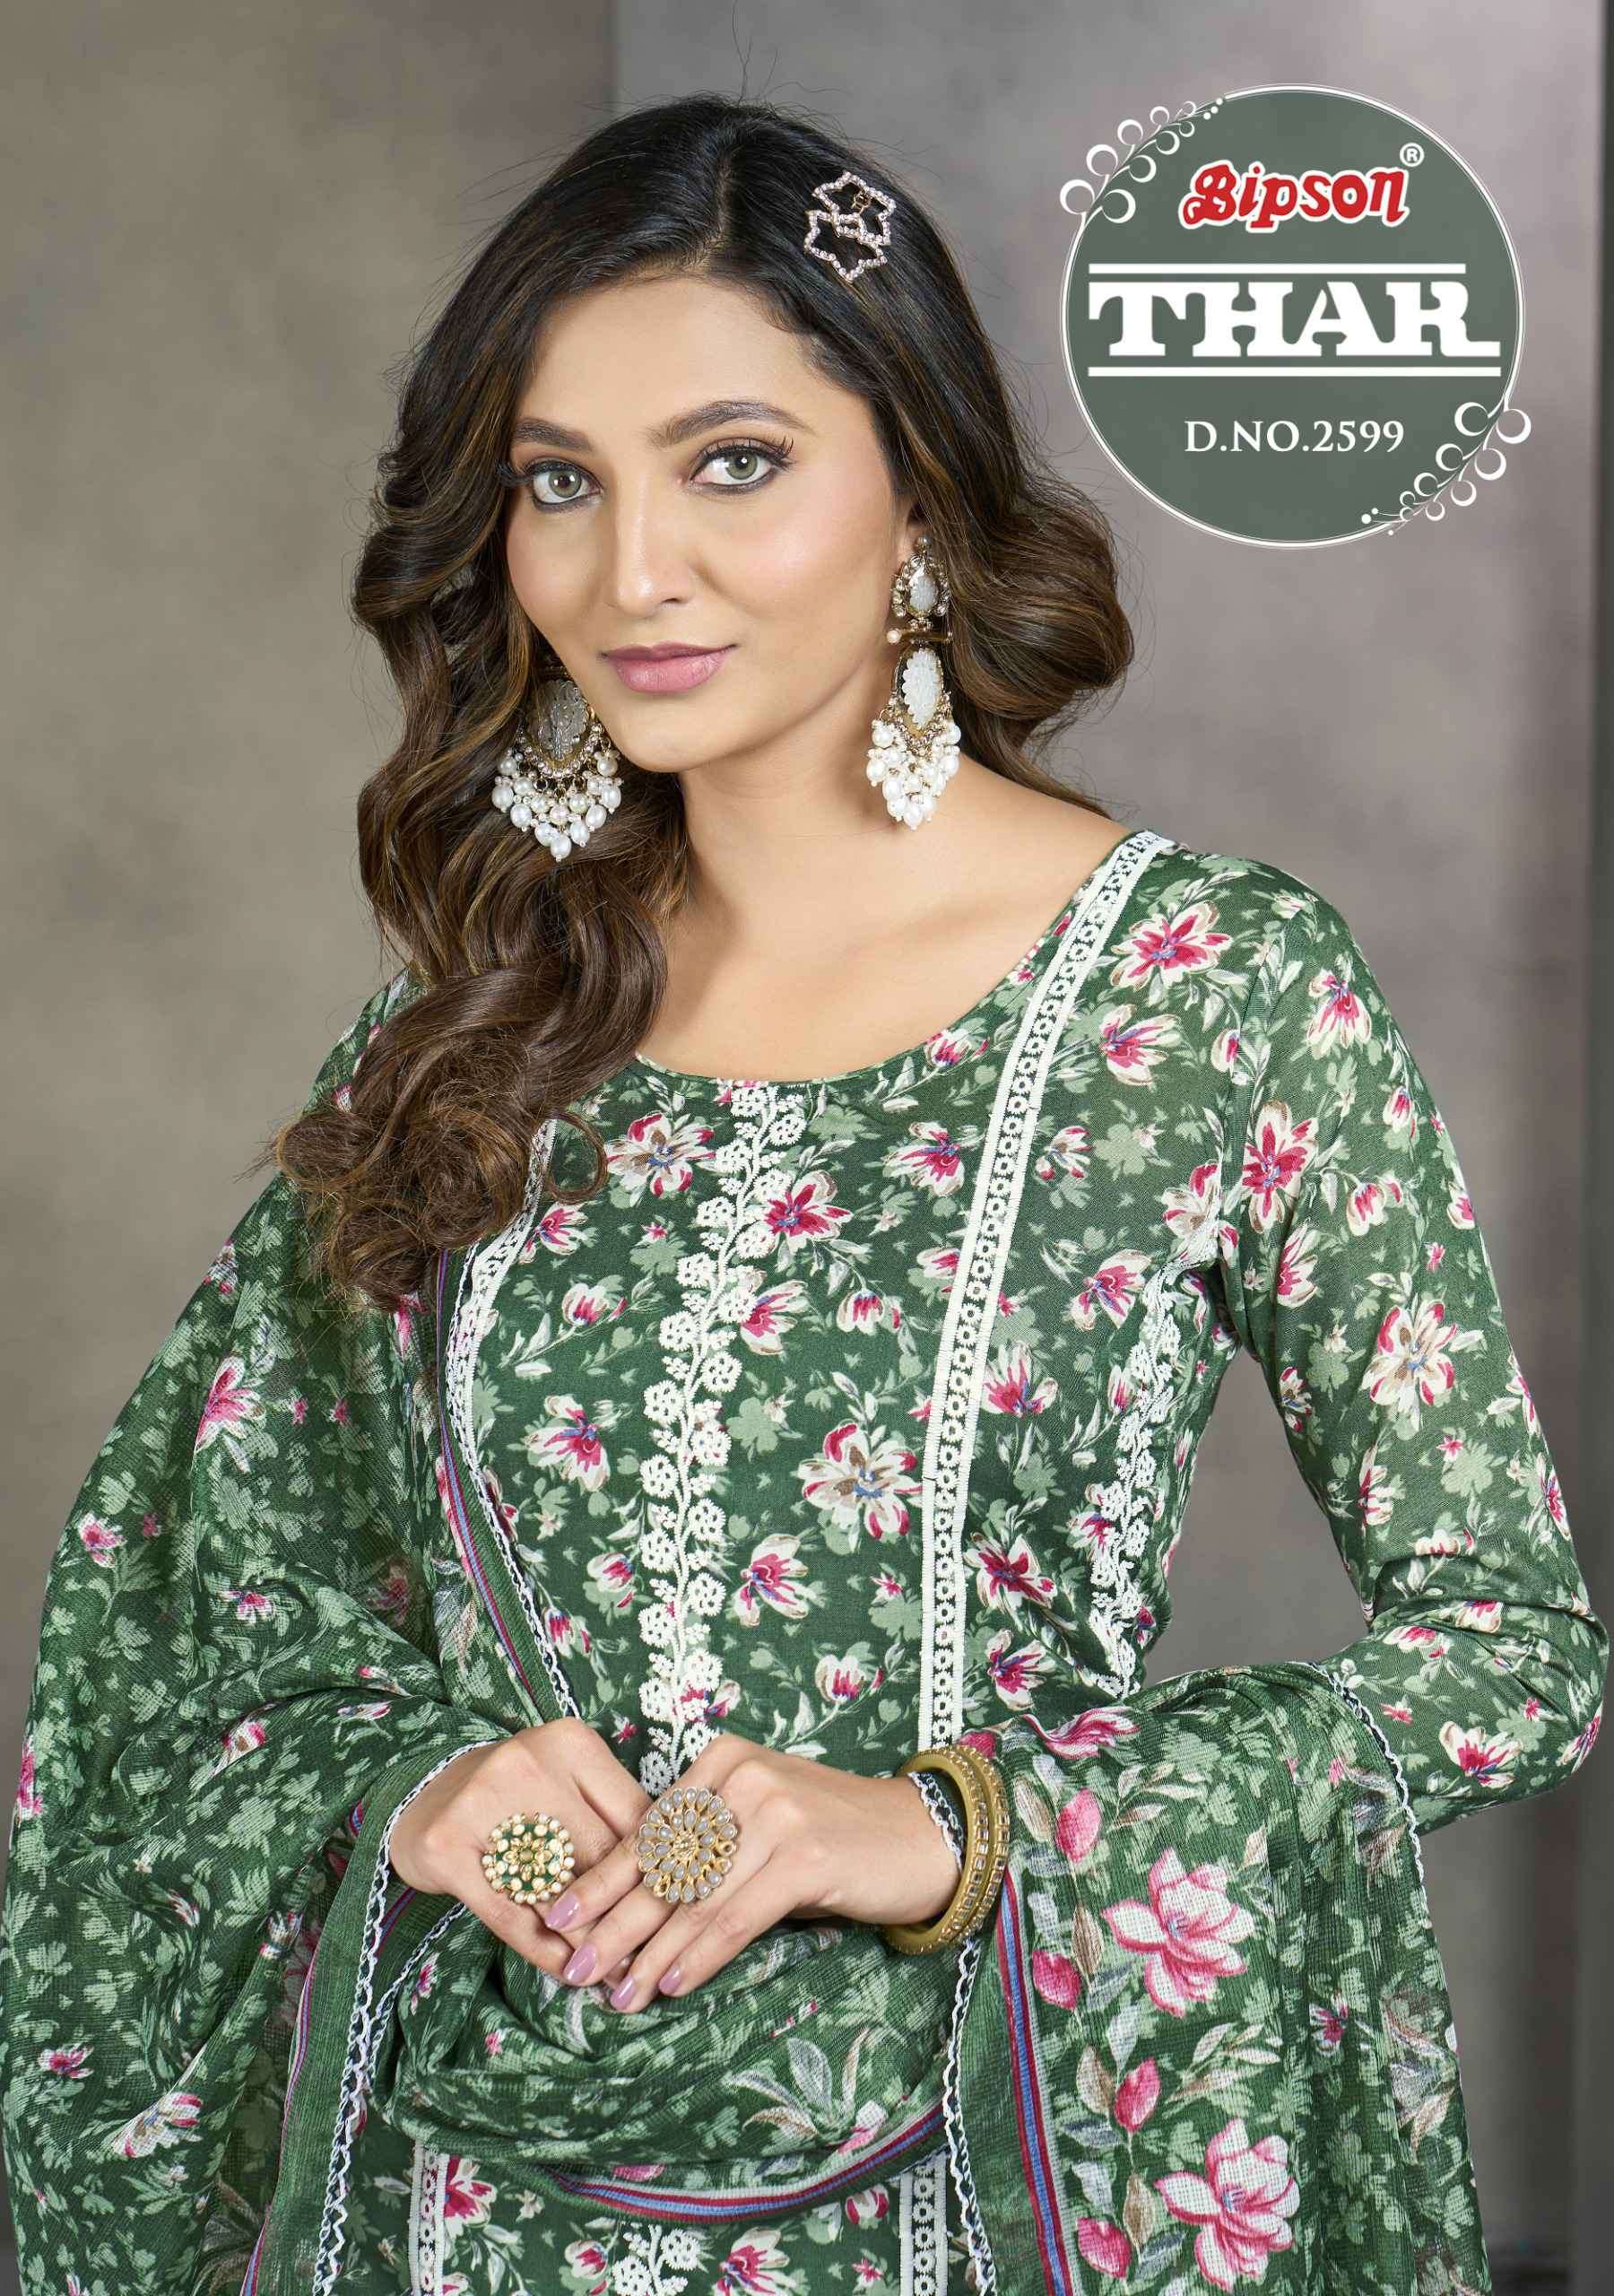 Bipson Thar 2599 Fancy Embroidery Work Cotton Suit Catalog Suppliers